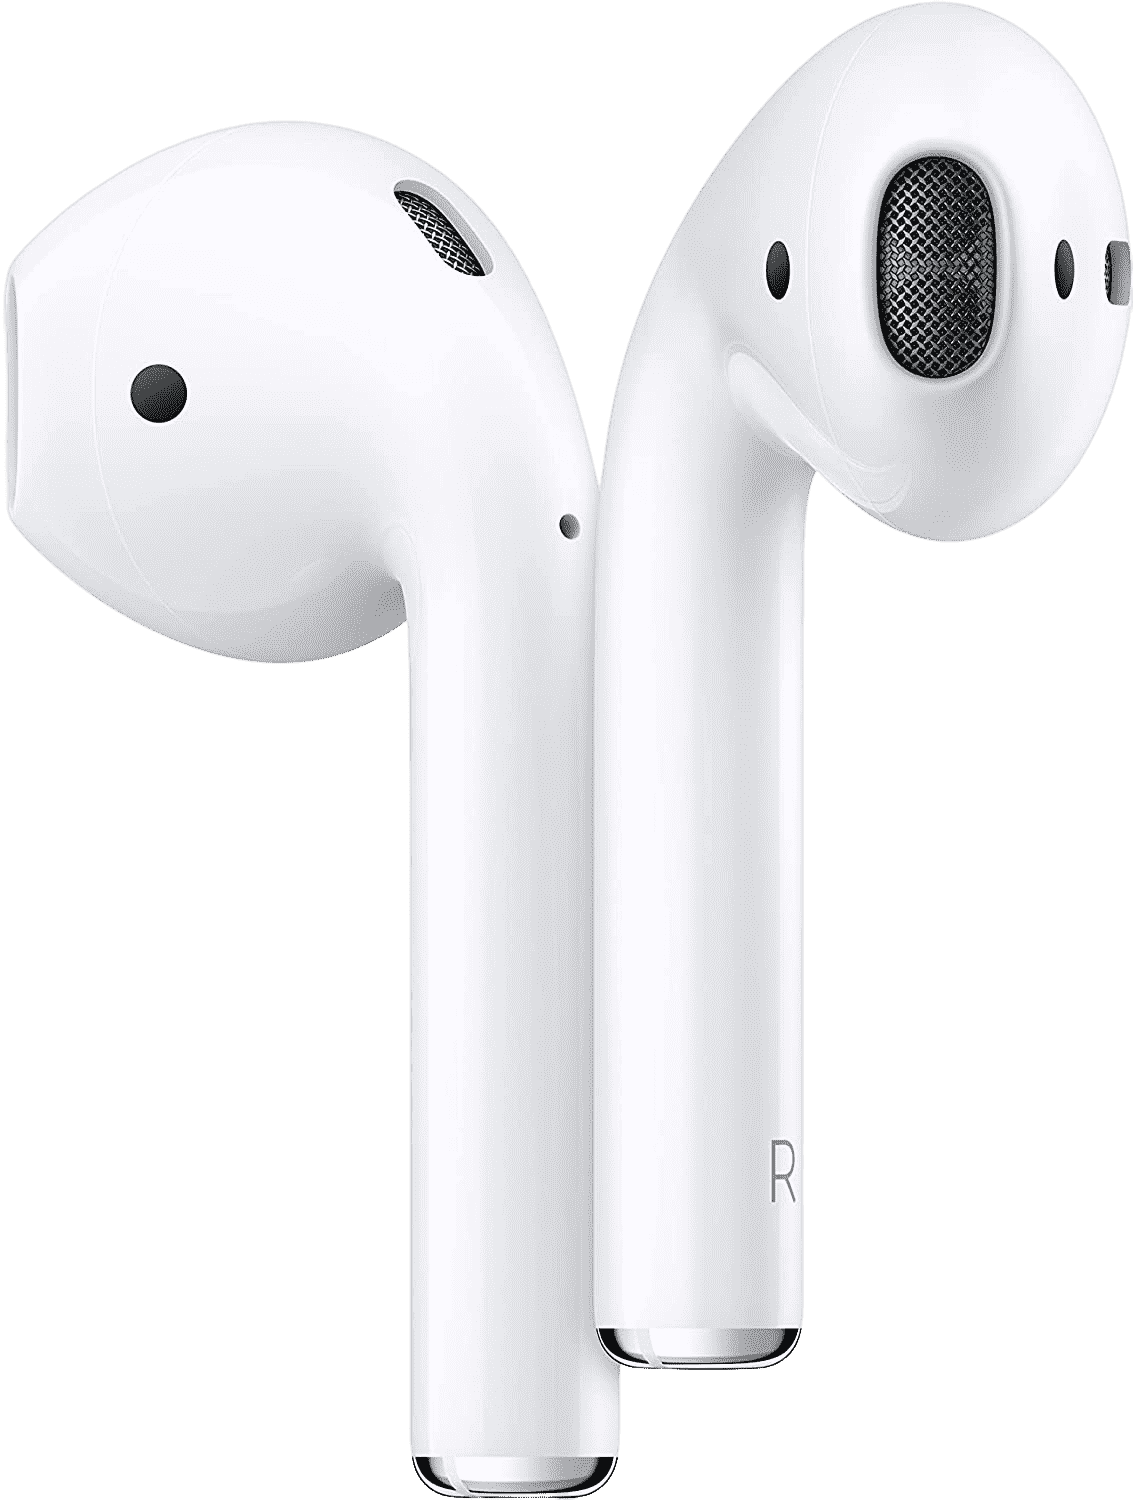 Apple AirPods Wireless Earbuds travel accessories for frequent flyers